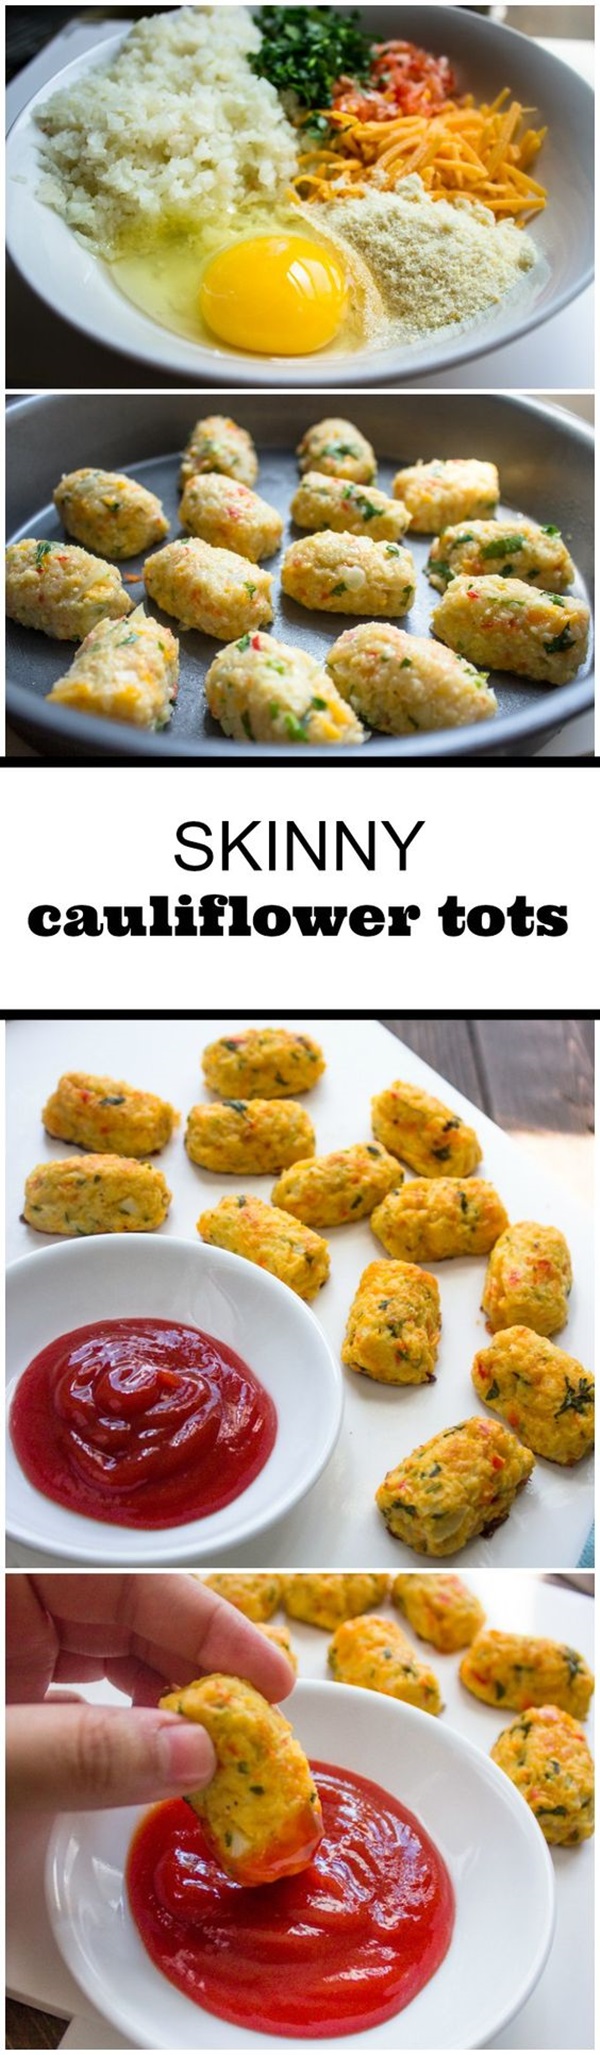 Ways To Use Cauliflower As A Low-Carb Replacement (10)